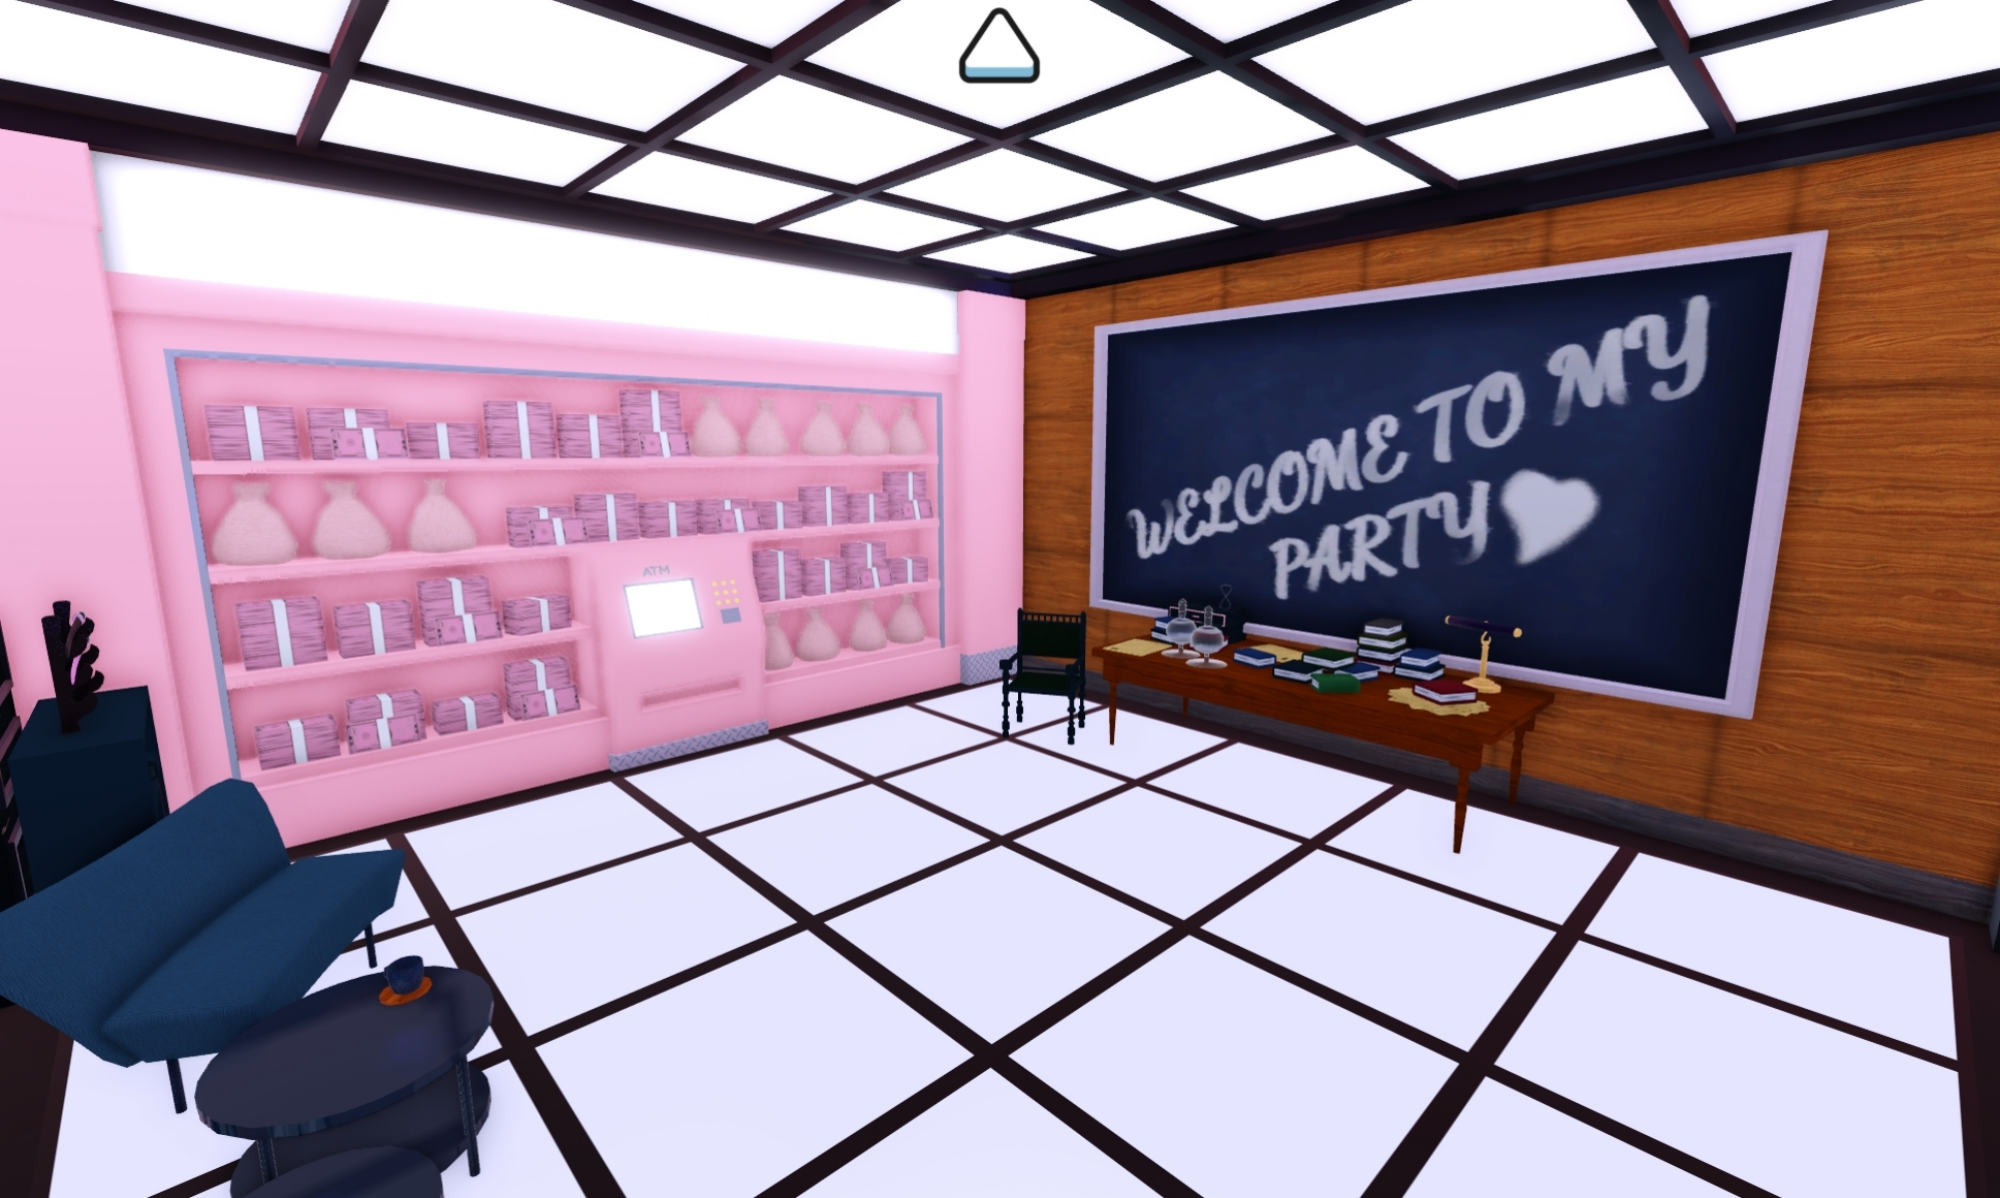 Roblox version of Lisa's bank vault, complete with chalk board and a pink wall stacked with money.